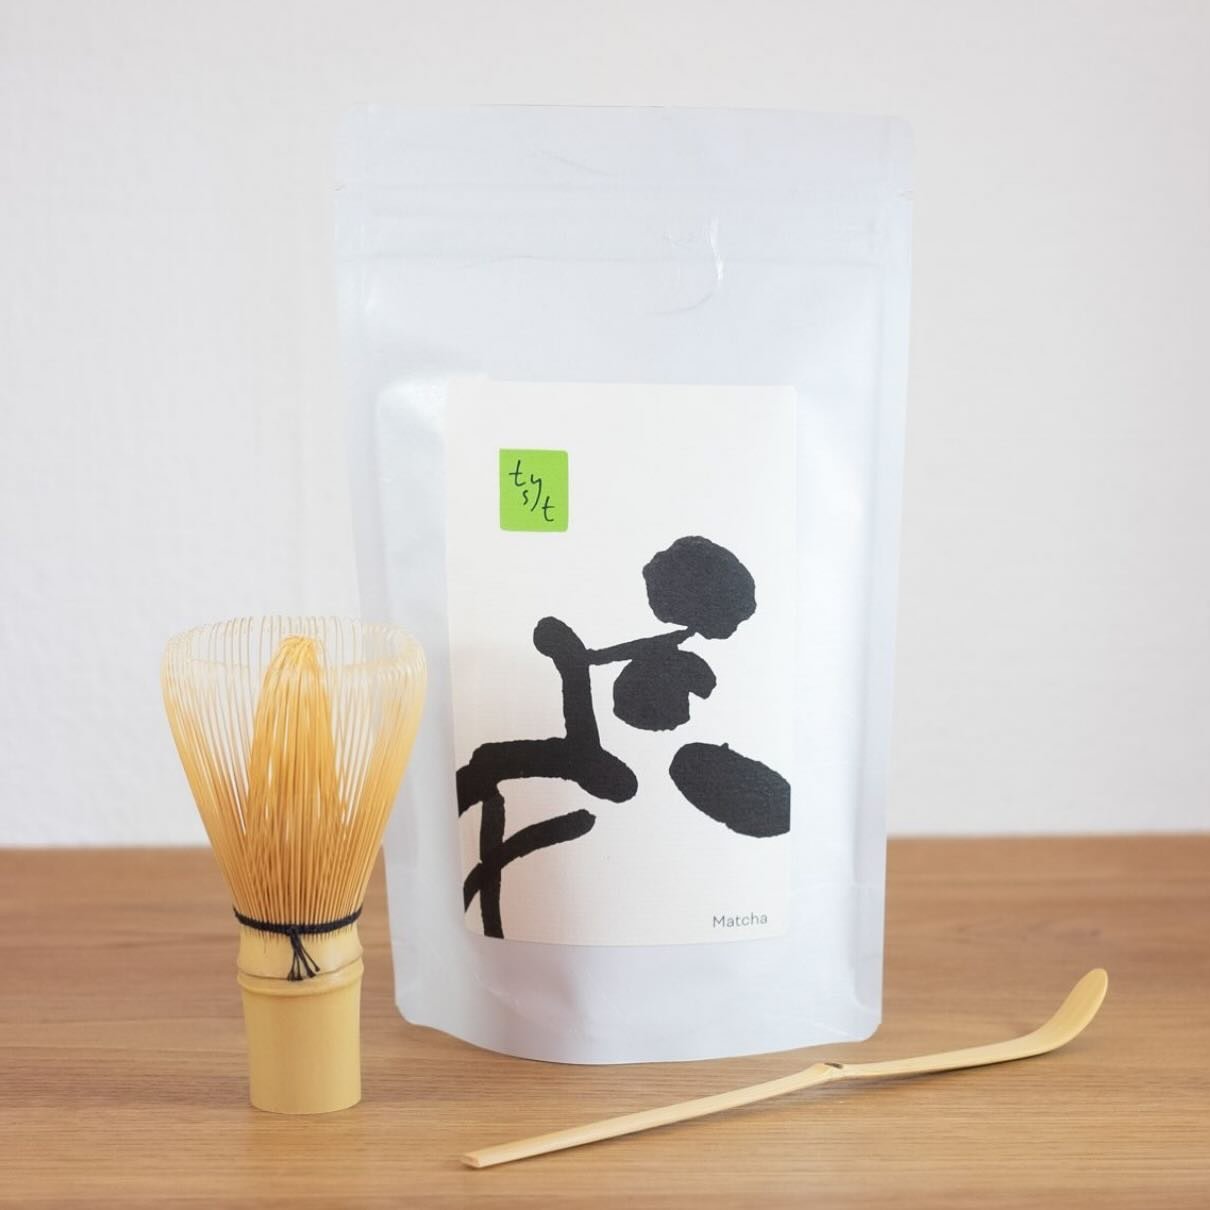 The Matcha Kit🍵

The perfect starter kit for whisking a perfect  matcha. 

Organic Ceremonial Grade Matcha, Chasen (whisk) &amp; Chashaku (scoop) - all you have to do is reach for your favorite chawan (matcha bowl).

Available at www.tystte.dk

#jap